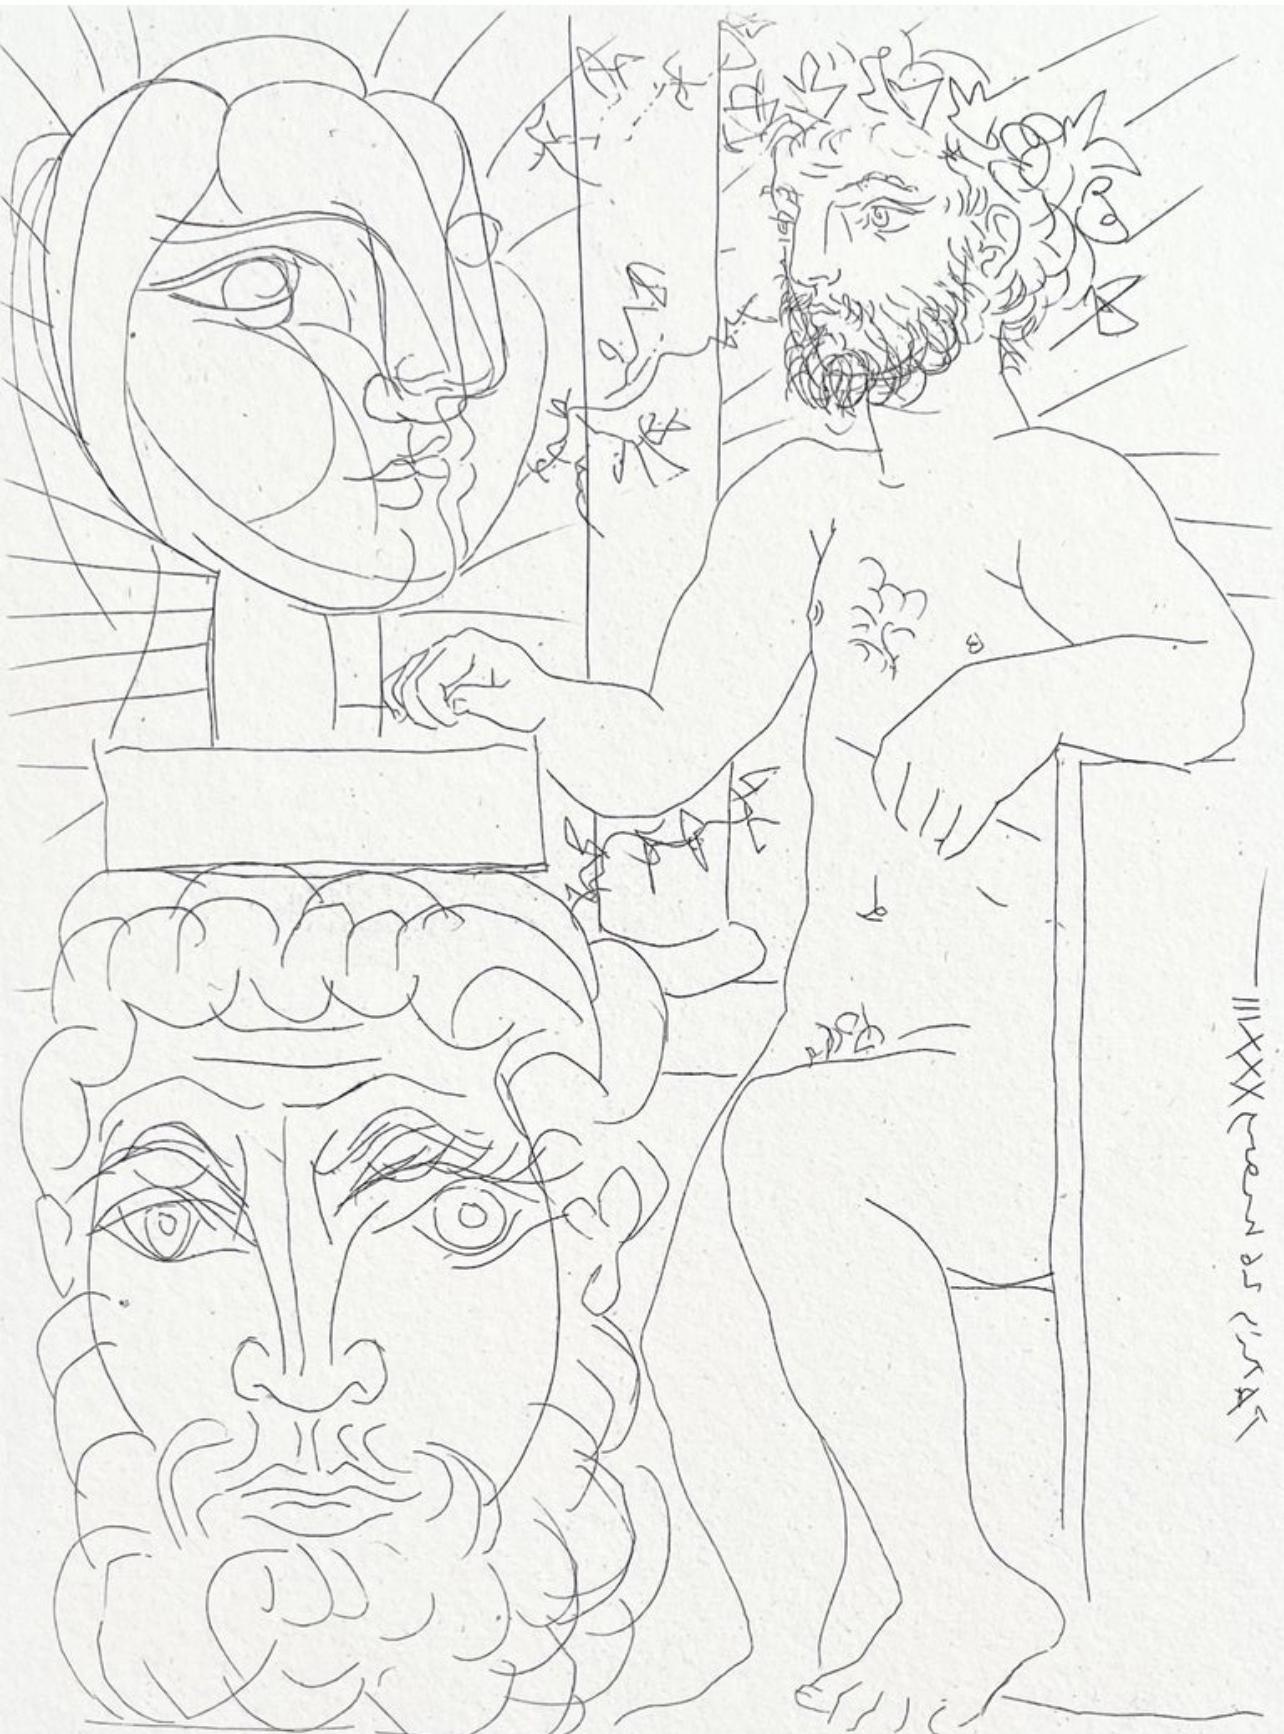 Picasso, two artworks (after) 1